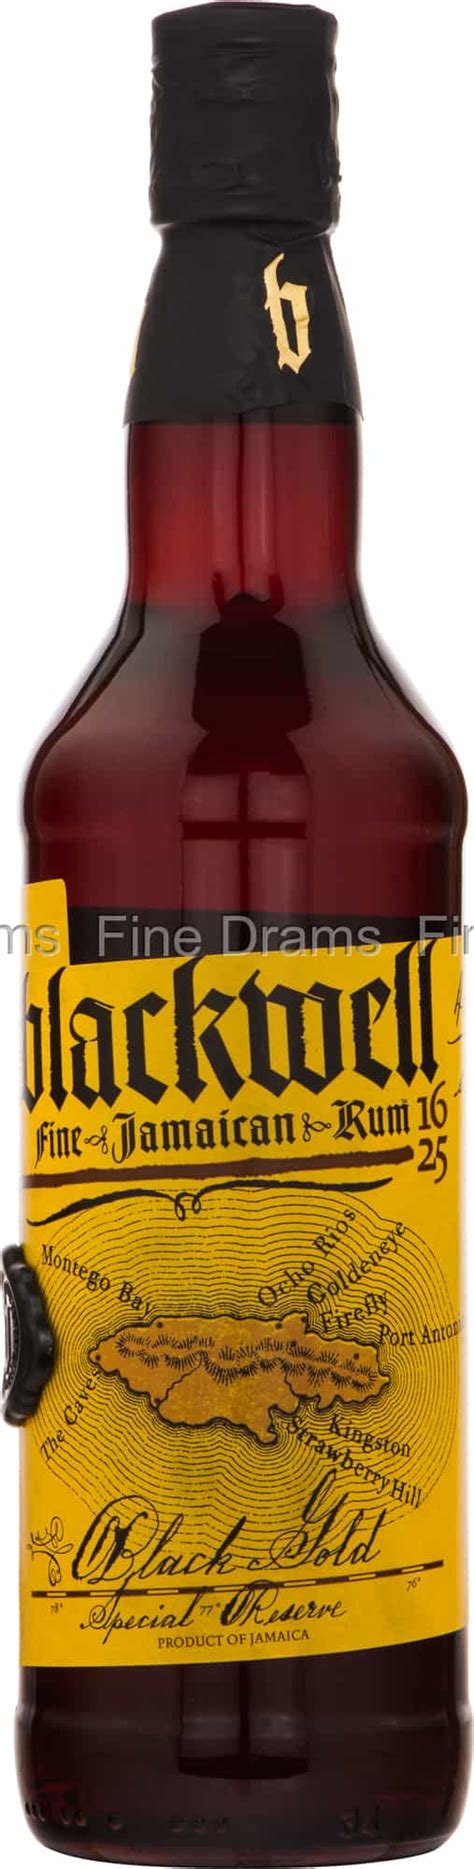 It was formerly a colony of the british empire until it was granted full independence in. Blackwell Fine Jamaican Rum